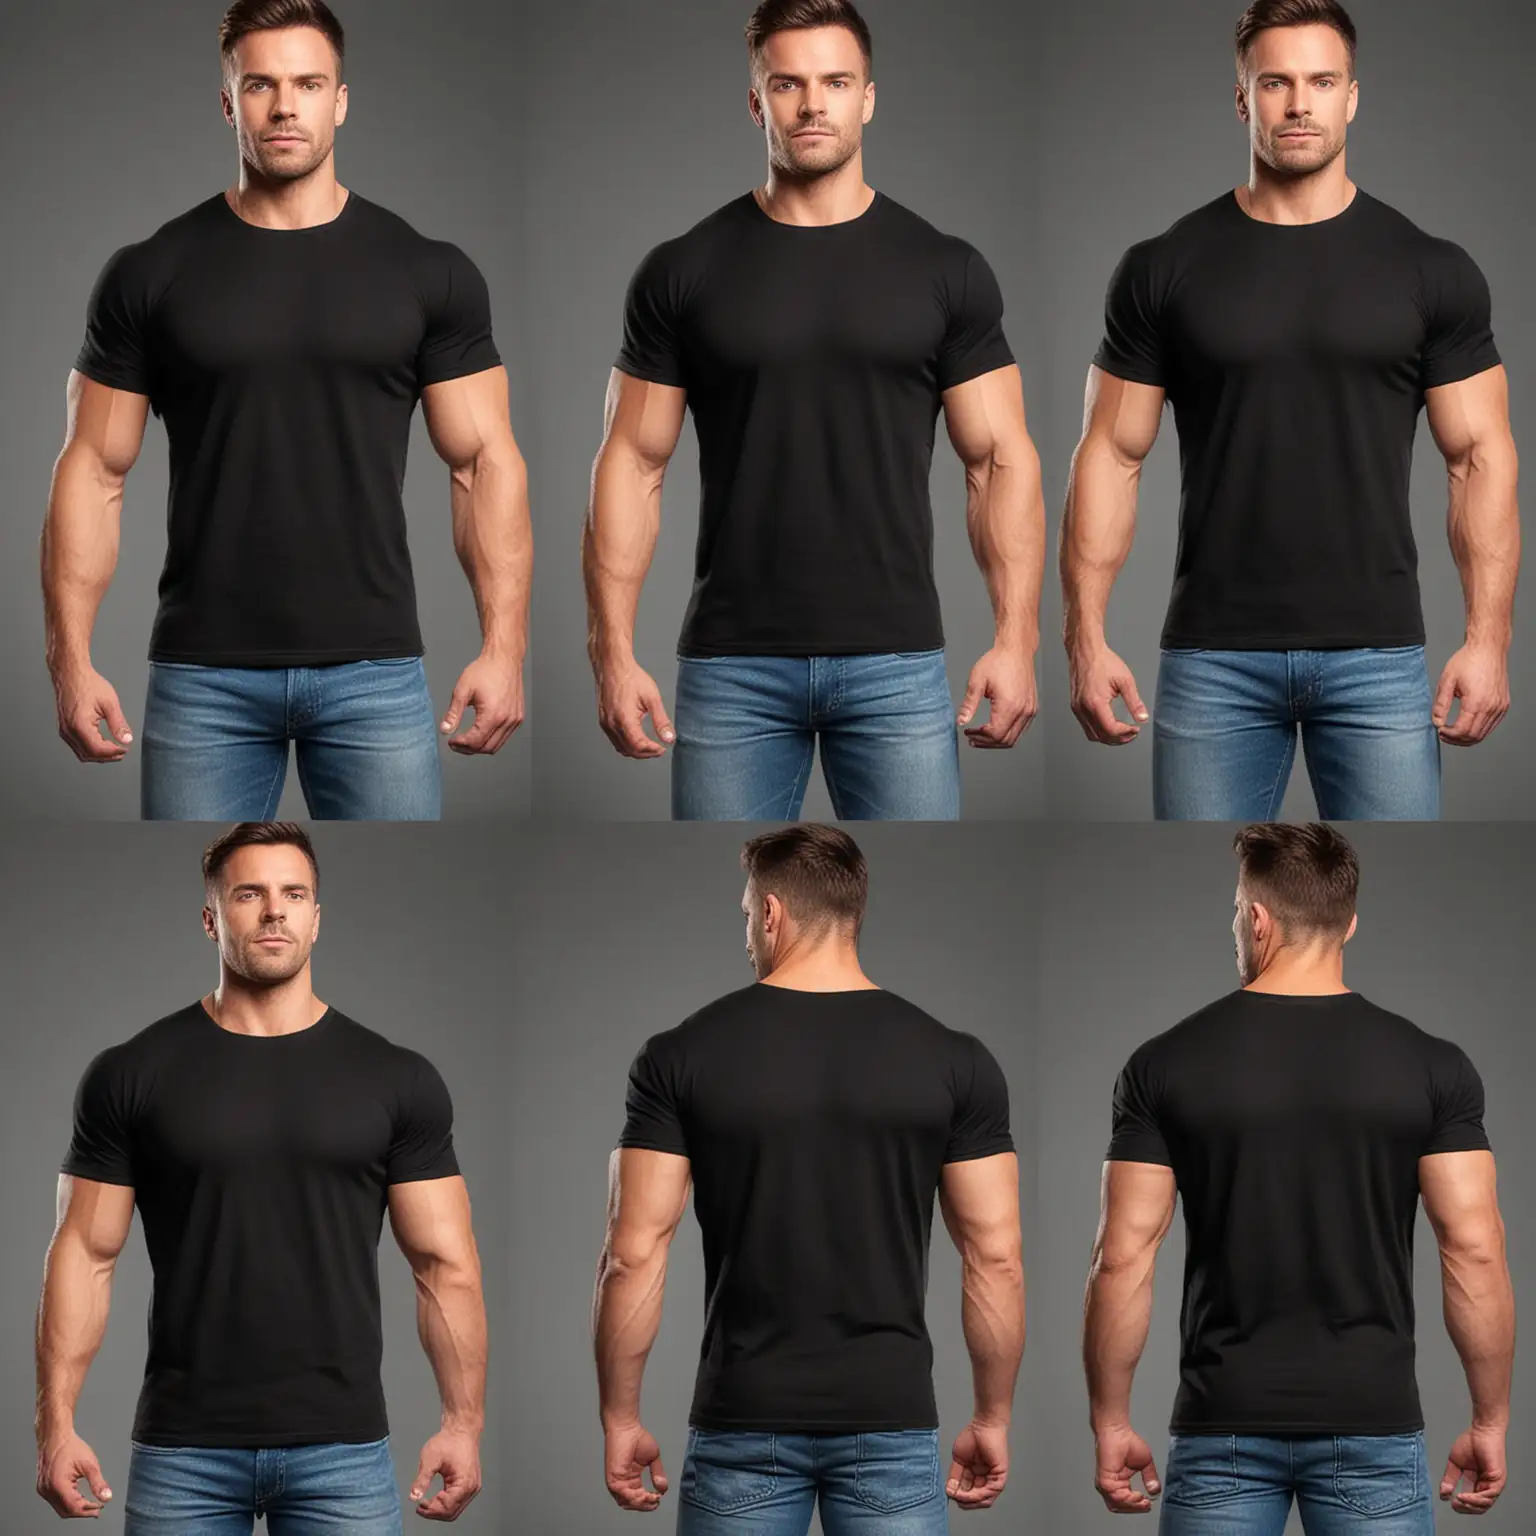 generate images of body builder man wearing black plain tshirt from 4 angles